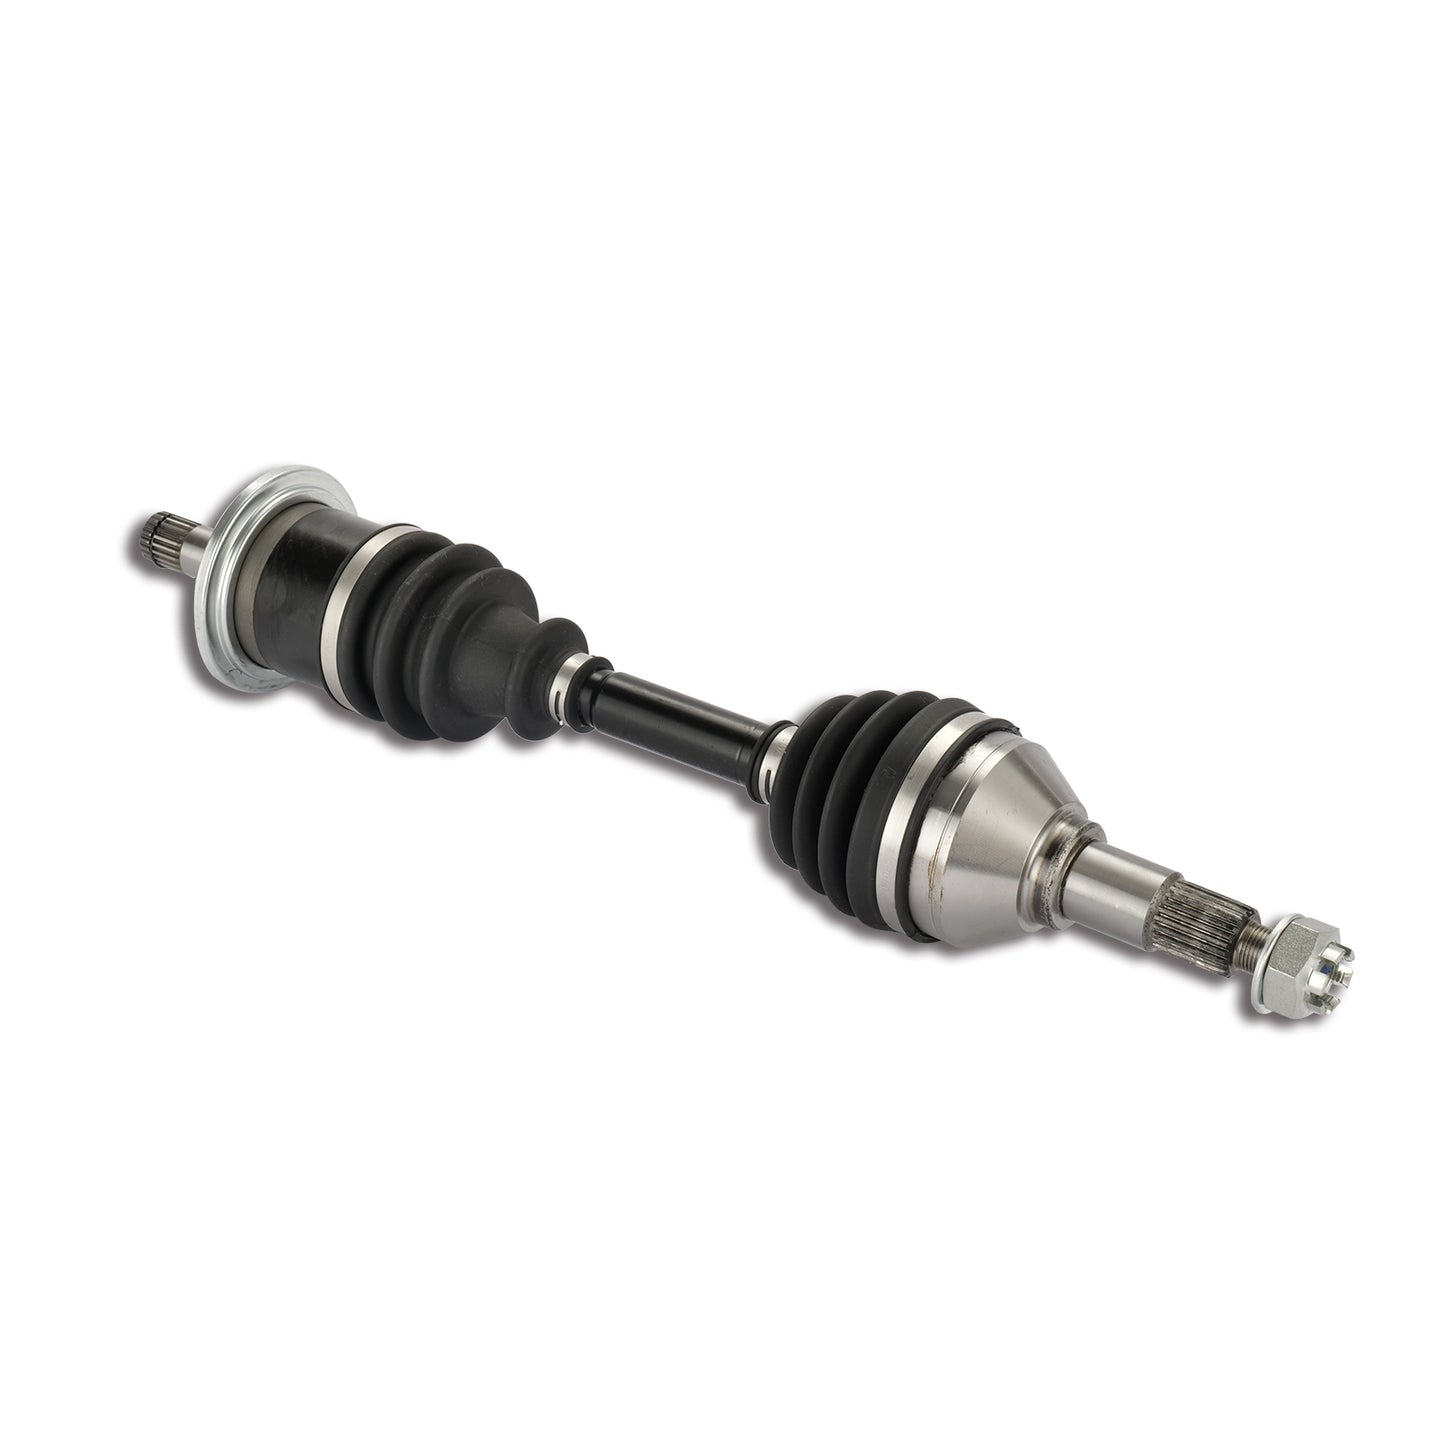 CAM-CA116 Front Left Drive Shaft CV Axle for CAN AM (2013-2018) Outlander 450 XMR, 650 XMR-MAX 650 XMR, 800 XMR, 850 XMR-MAX 850 XMR, 1000 XMR-MAX 1000 XMR LF / (2016-2018)